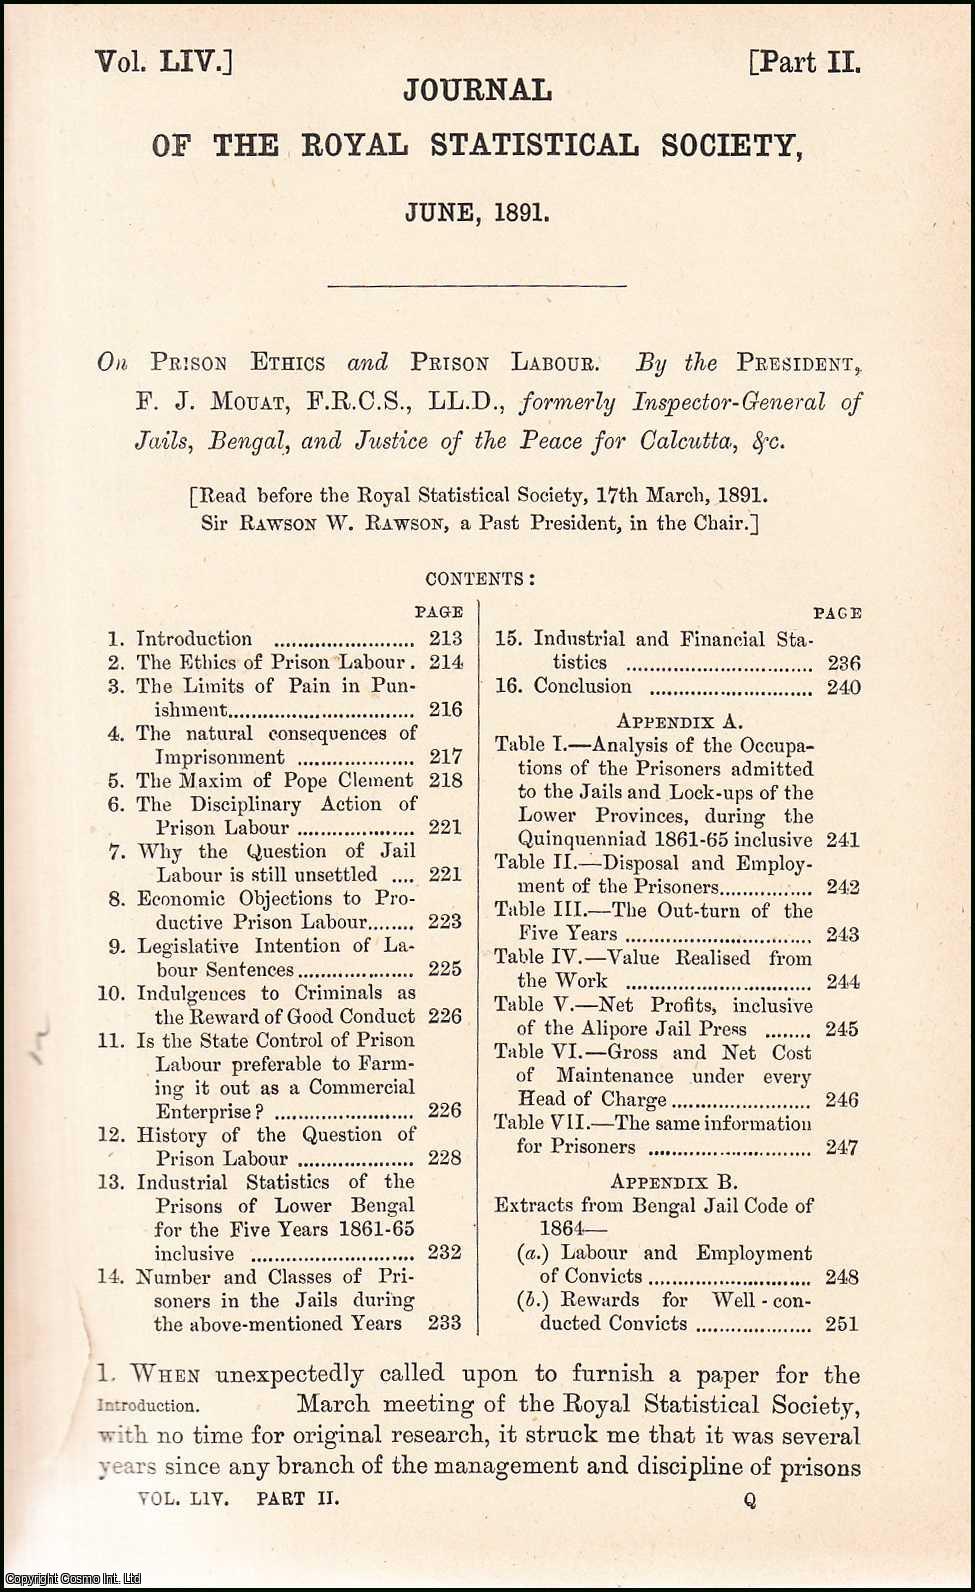 President, F.J. Mouat, F.R.C.S., LL.D., Formerly Inspector-General of Jails, Bengal, & Justice of the Peace for Calcutta. - Prison Ethics & Prison Labour. An uncommon original article from the Journal of the Royal Statistical Society of London, 1891.